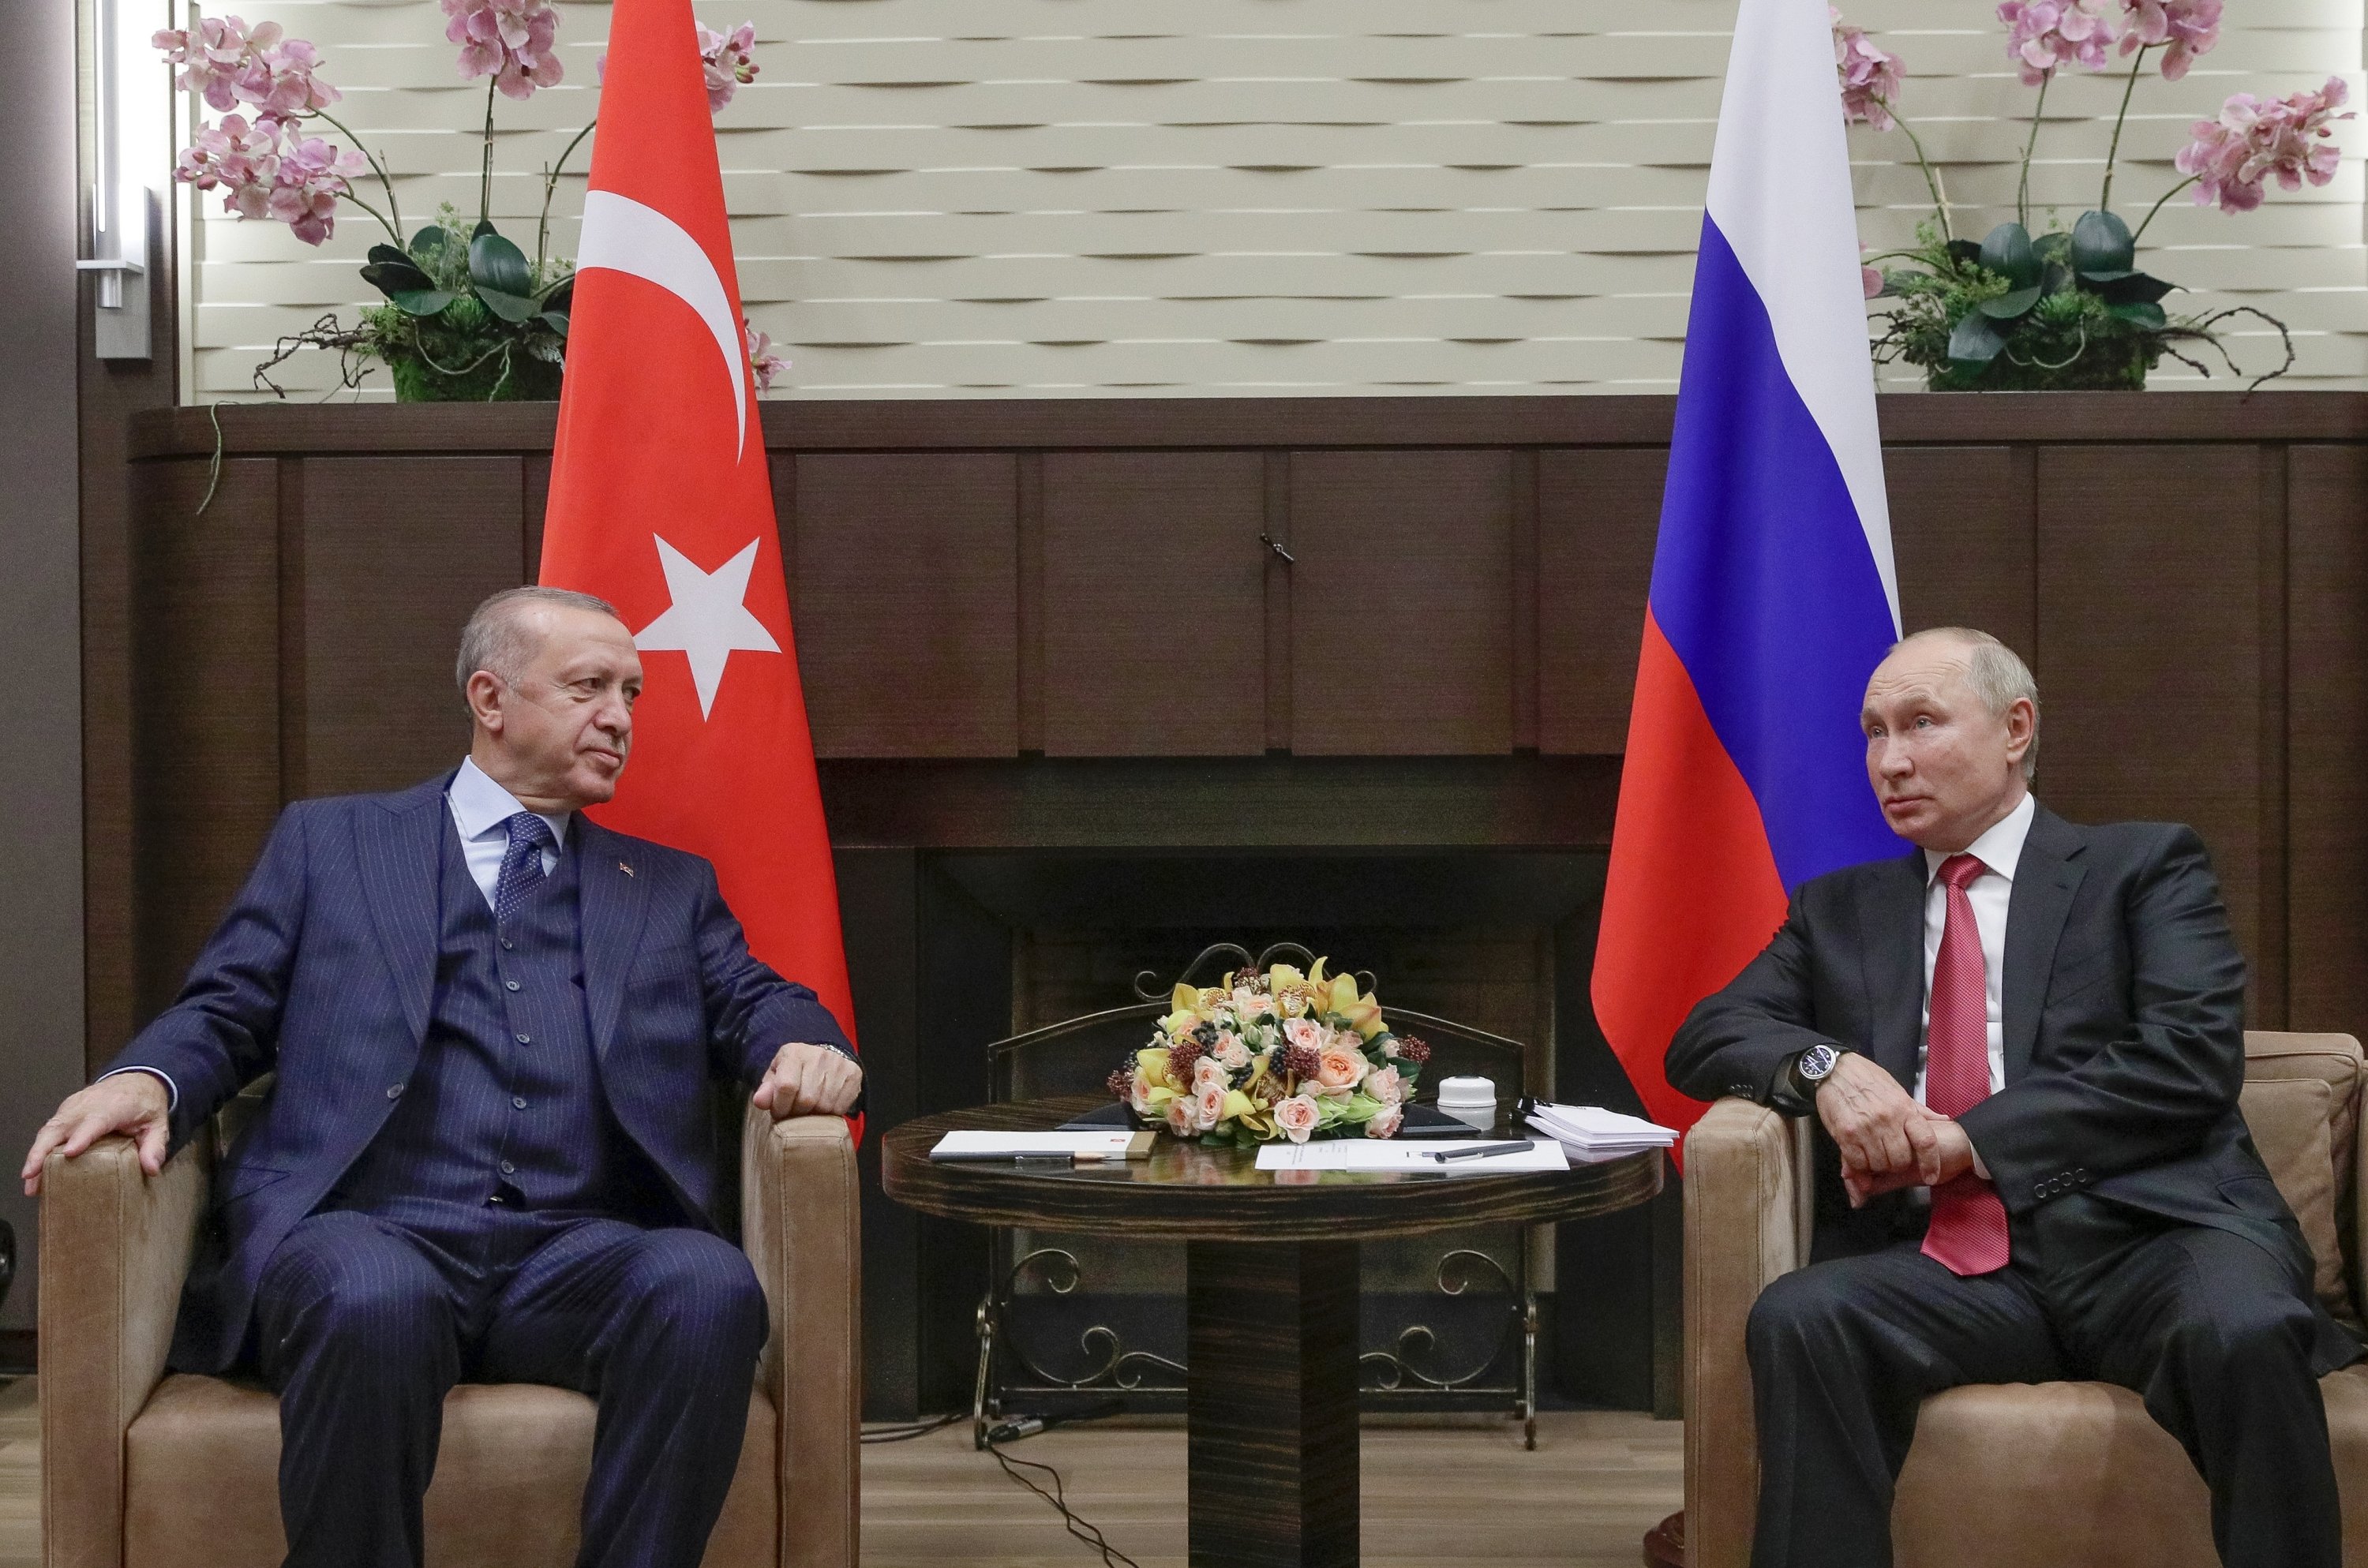 Expectations and choices for Erdoğan, Putin at Sochi Summit | Daily Sabah